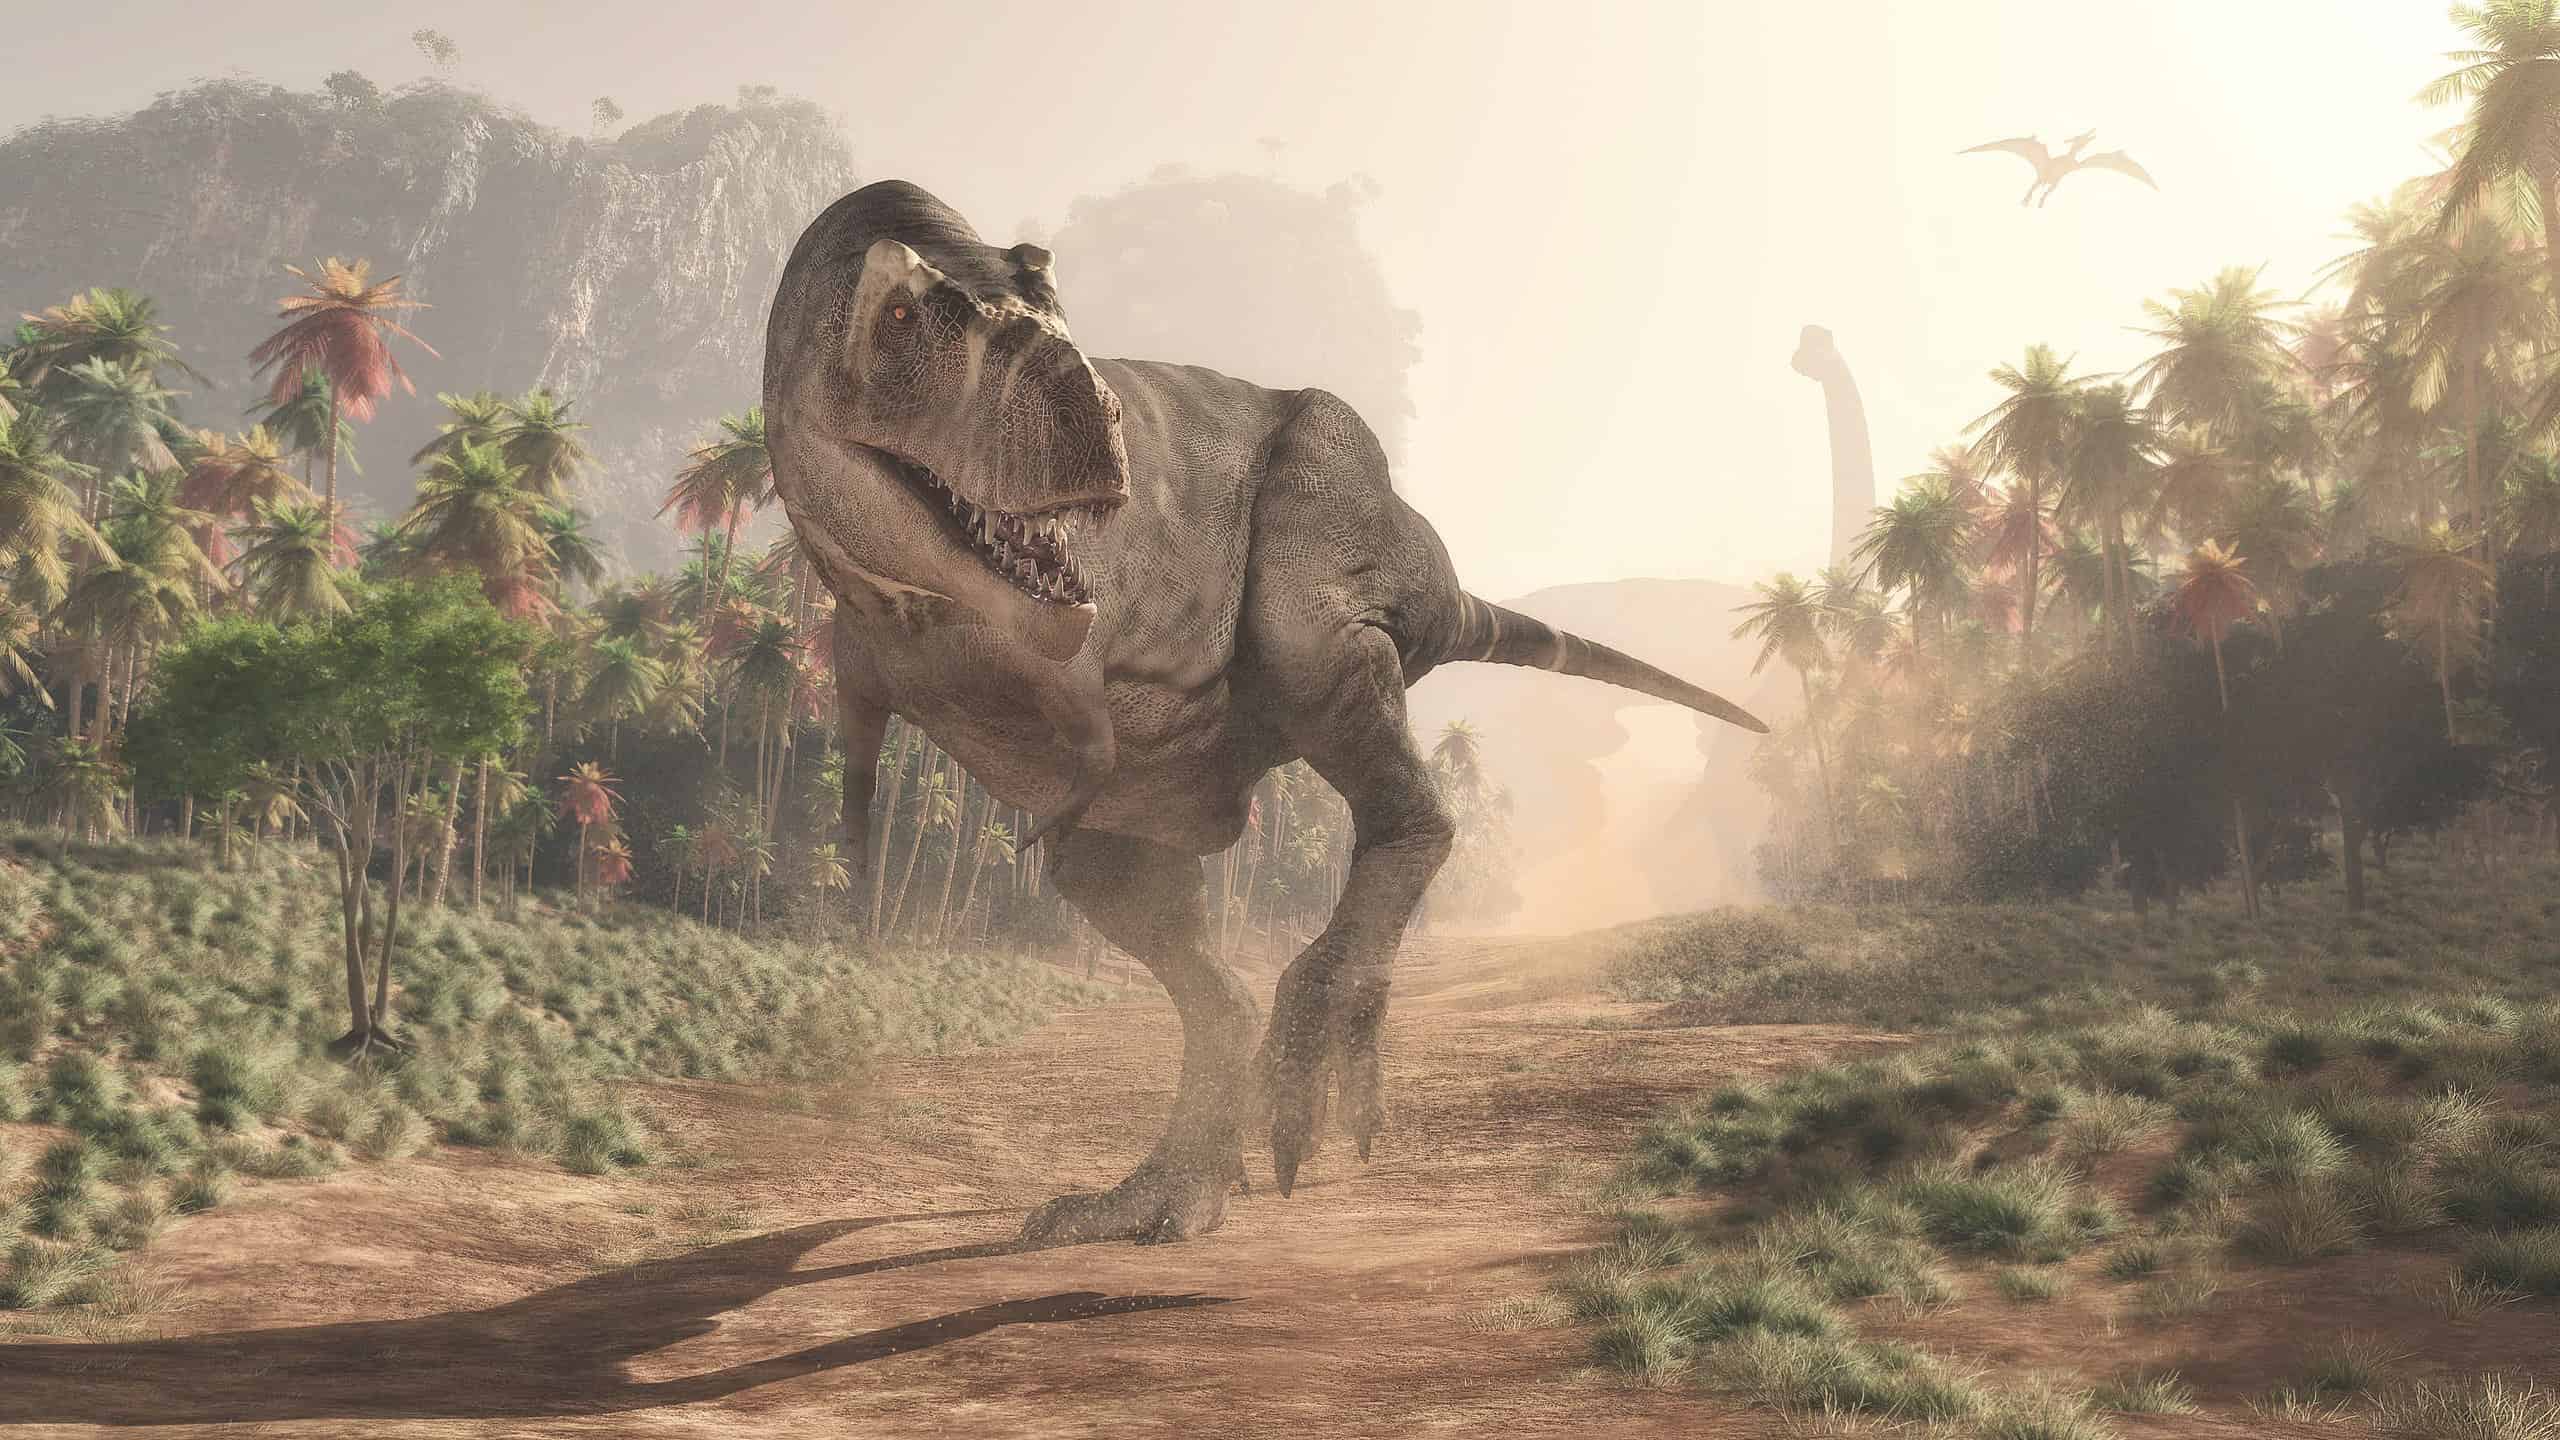 Jurassic Park version of T-Rex didn't exist - they actually looked totally  different, say scientists